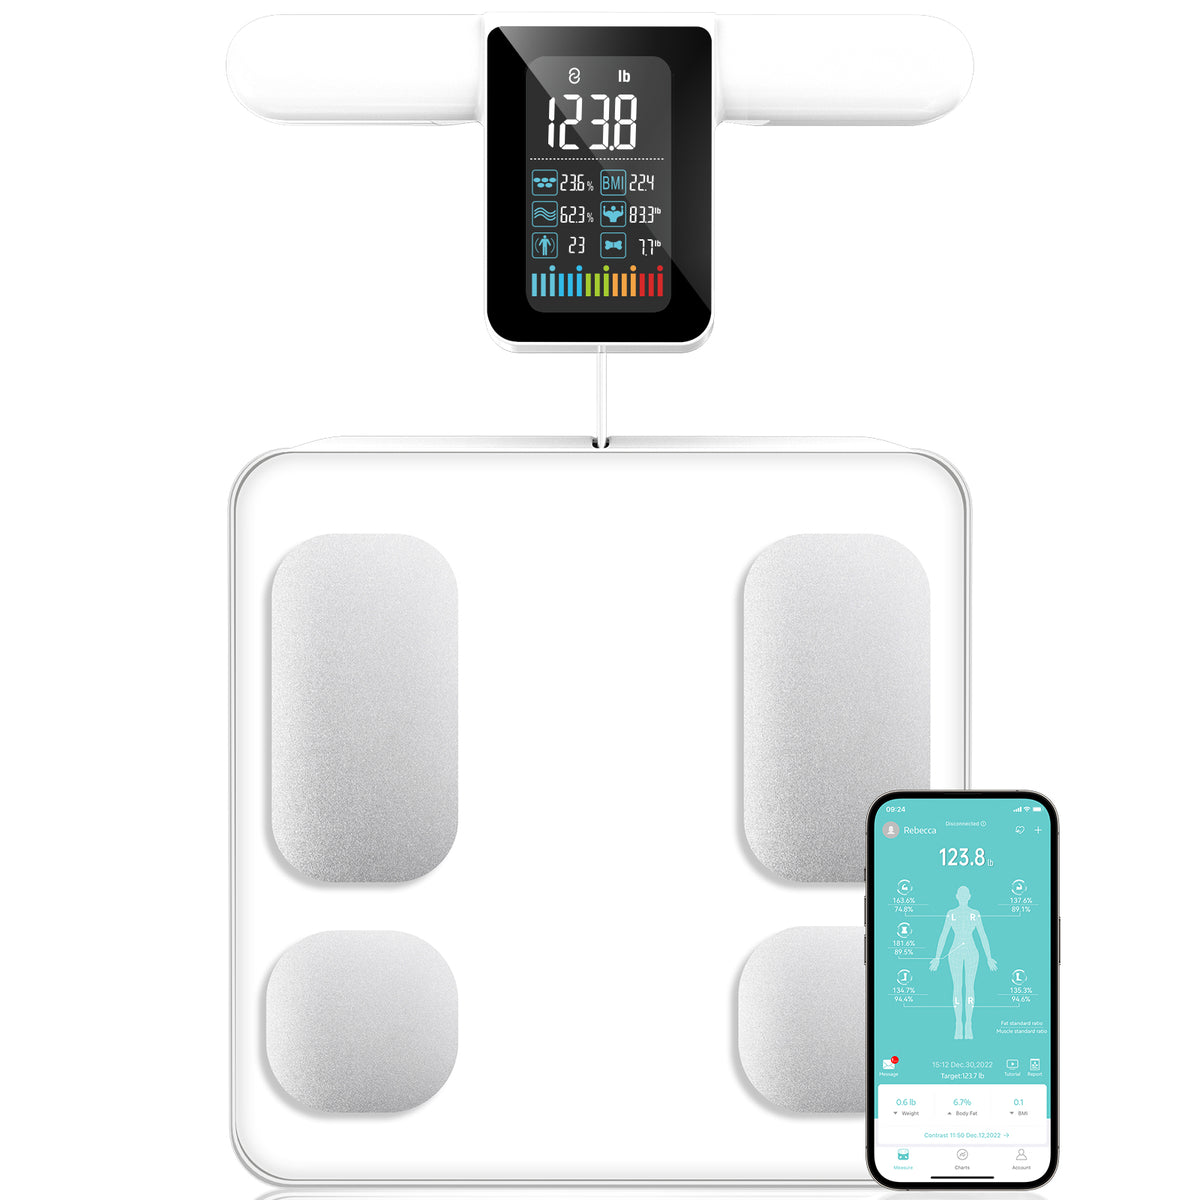 Lepulse P1 Body Fat Scales Intelligent Electronic Weight Smart